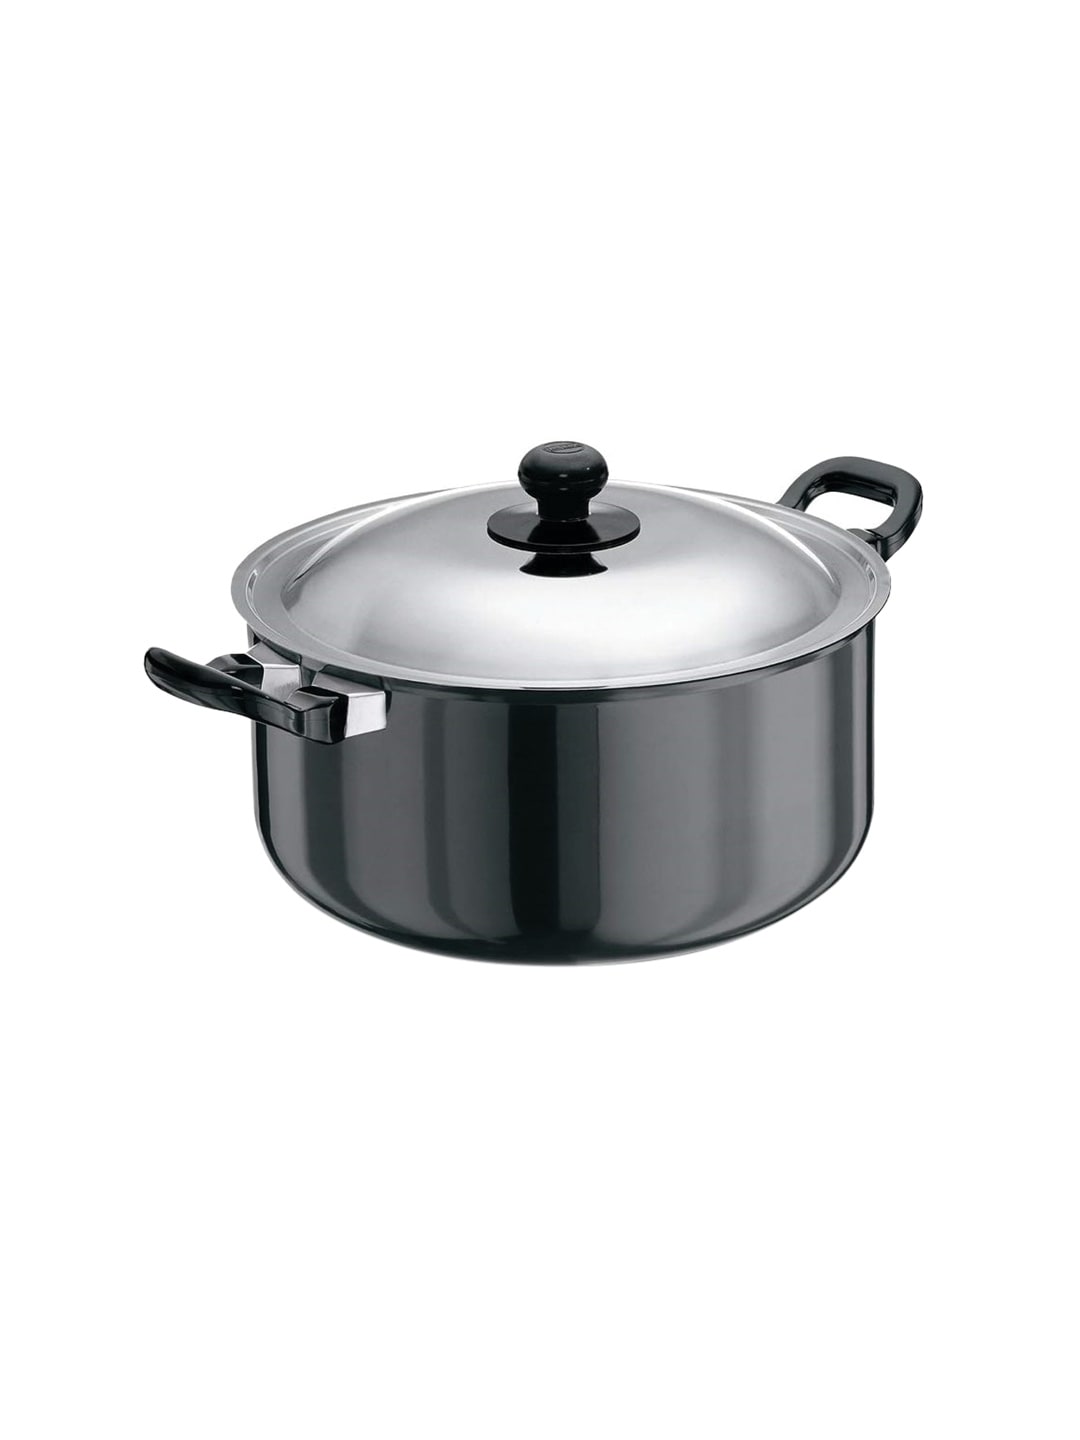 Hawkins Black & Silver-Toned Futura Hard Anodised Cook-N-Serve Stewpot With Stainless Steel Lid 5 Ltr Price in India